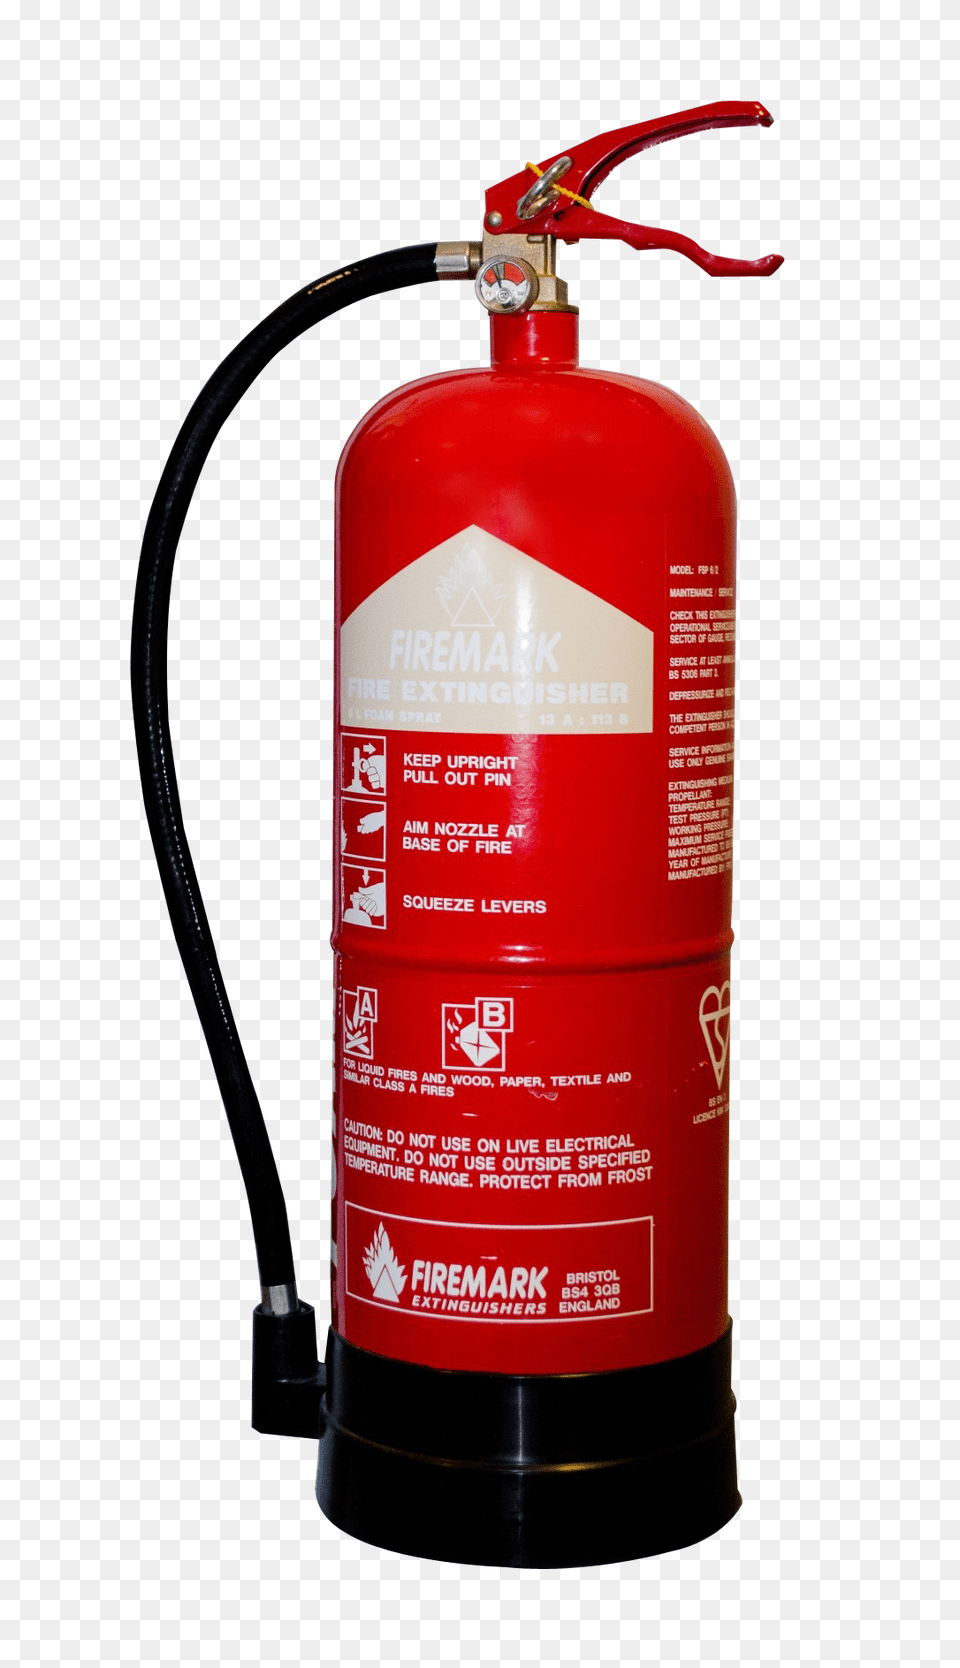 Fire Extinguisher Cylinder, Dynamite, Weapon, Machine Png Image